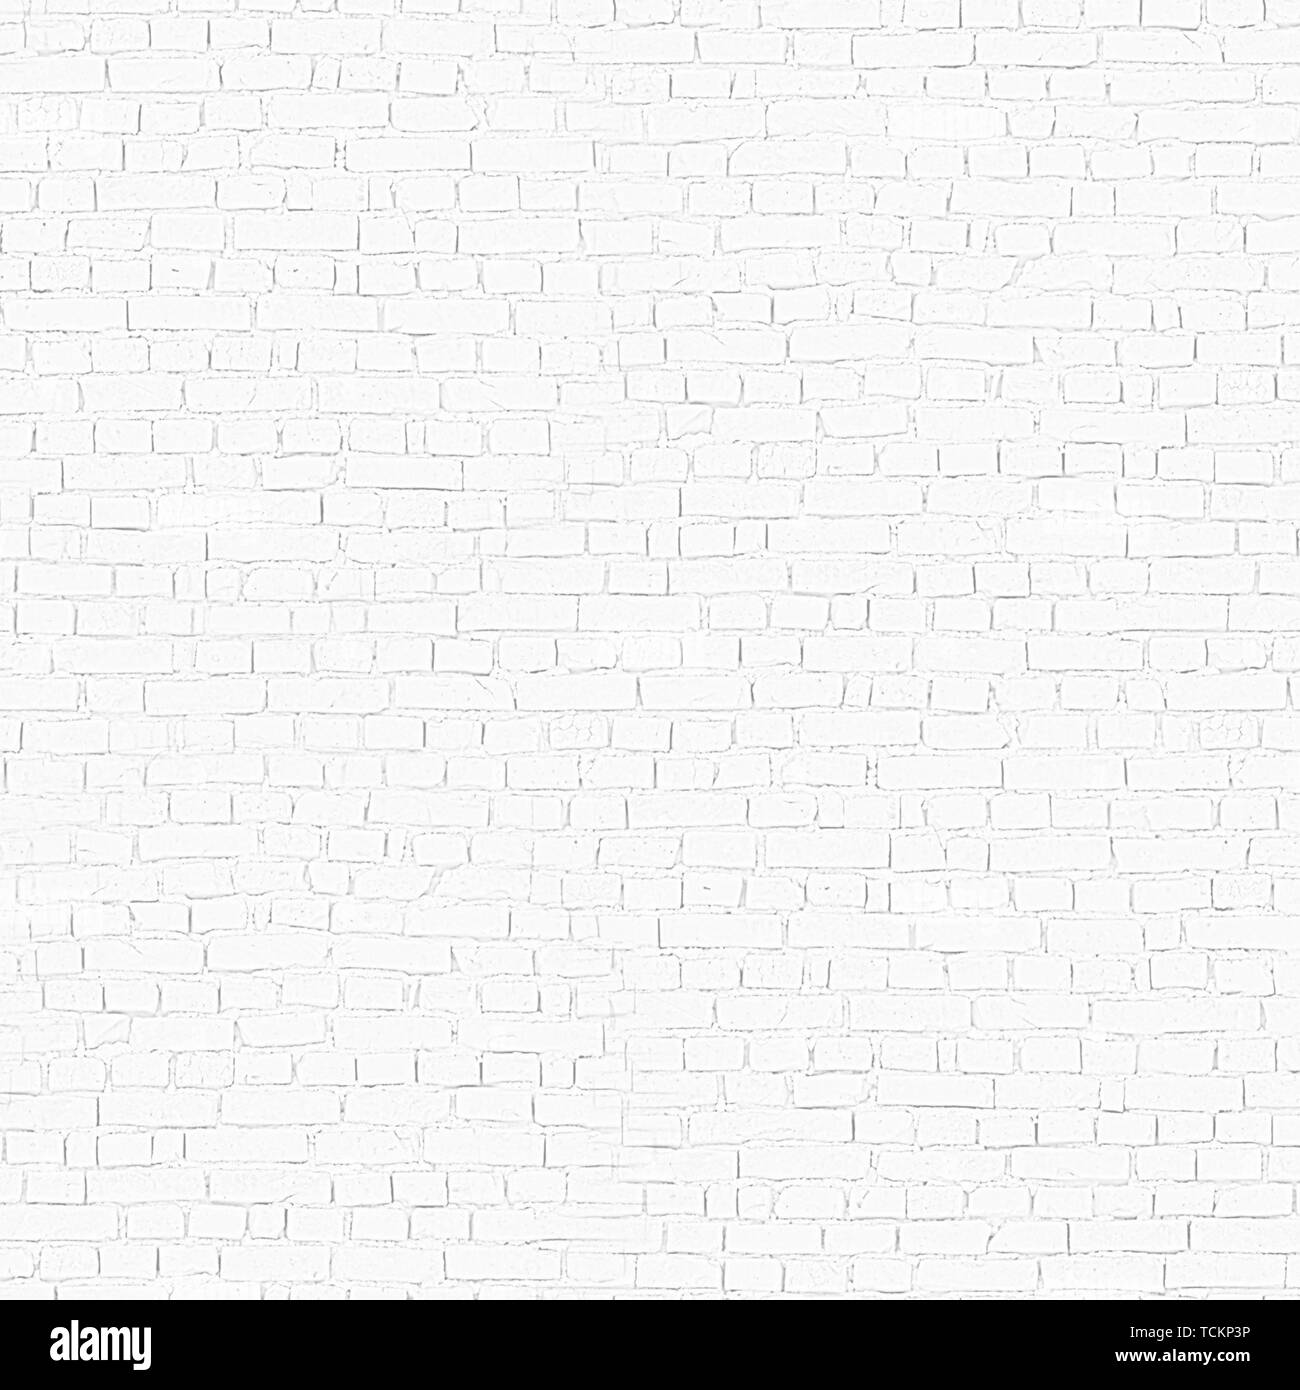 The Old Brick Walls Of White Brick Texture Or Background Stock Photo Alamy